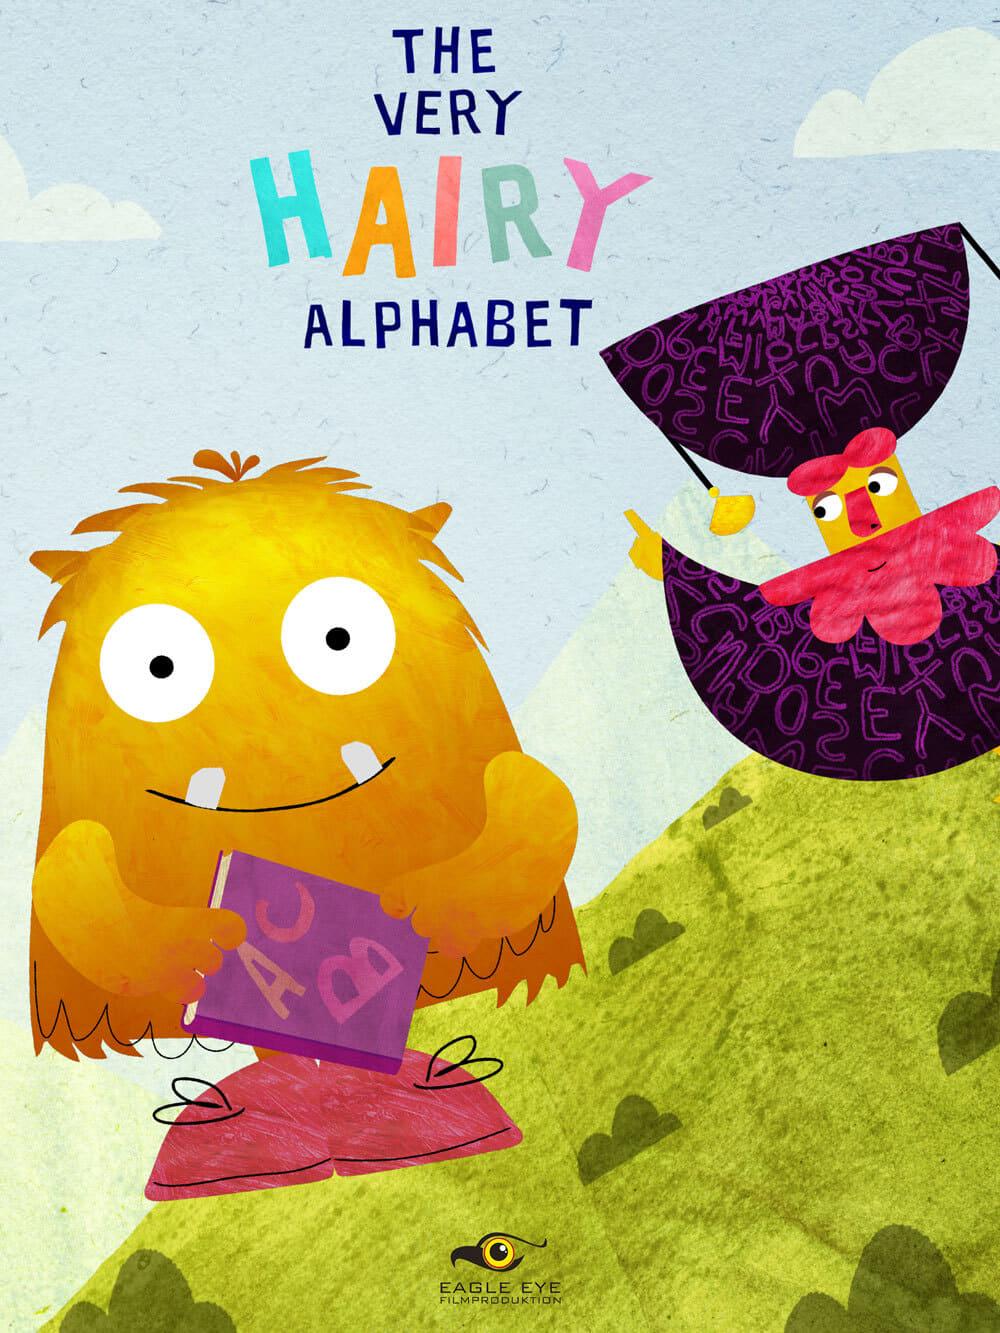 The Very Hairy Alphabet poster